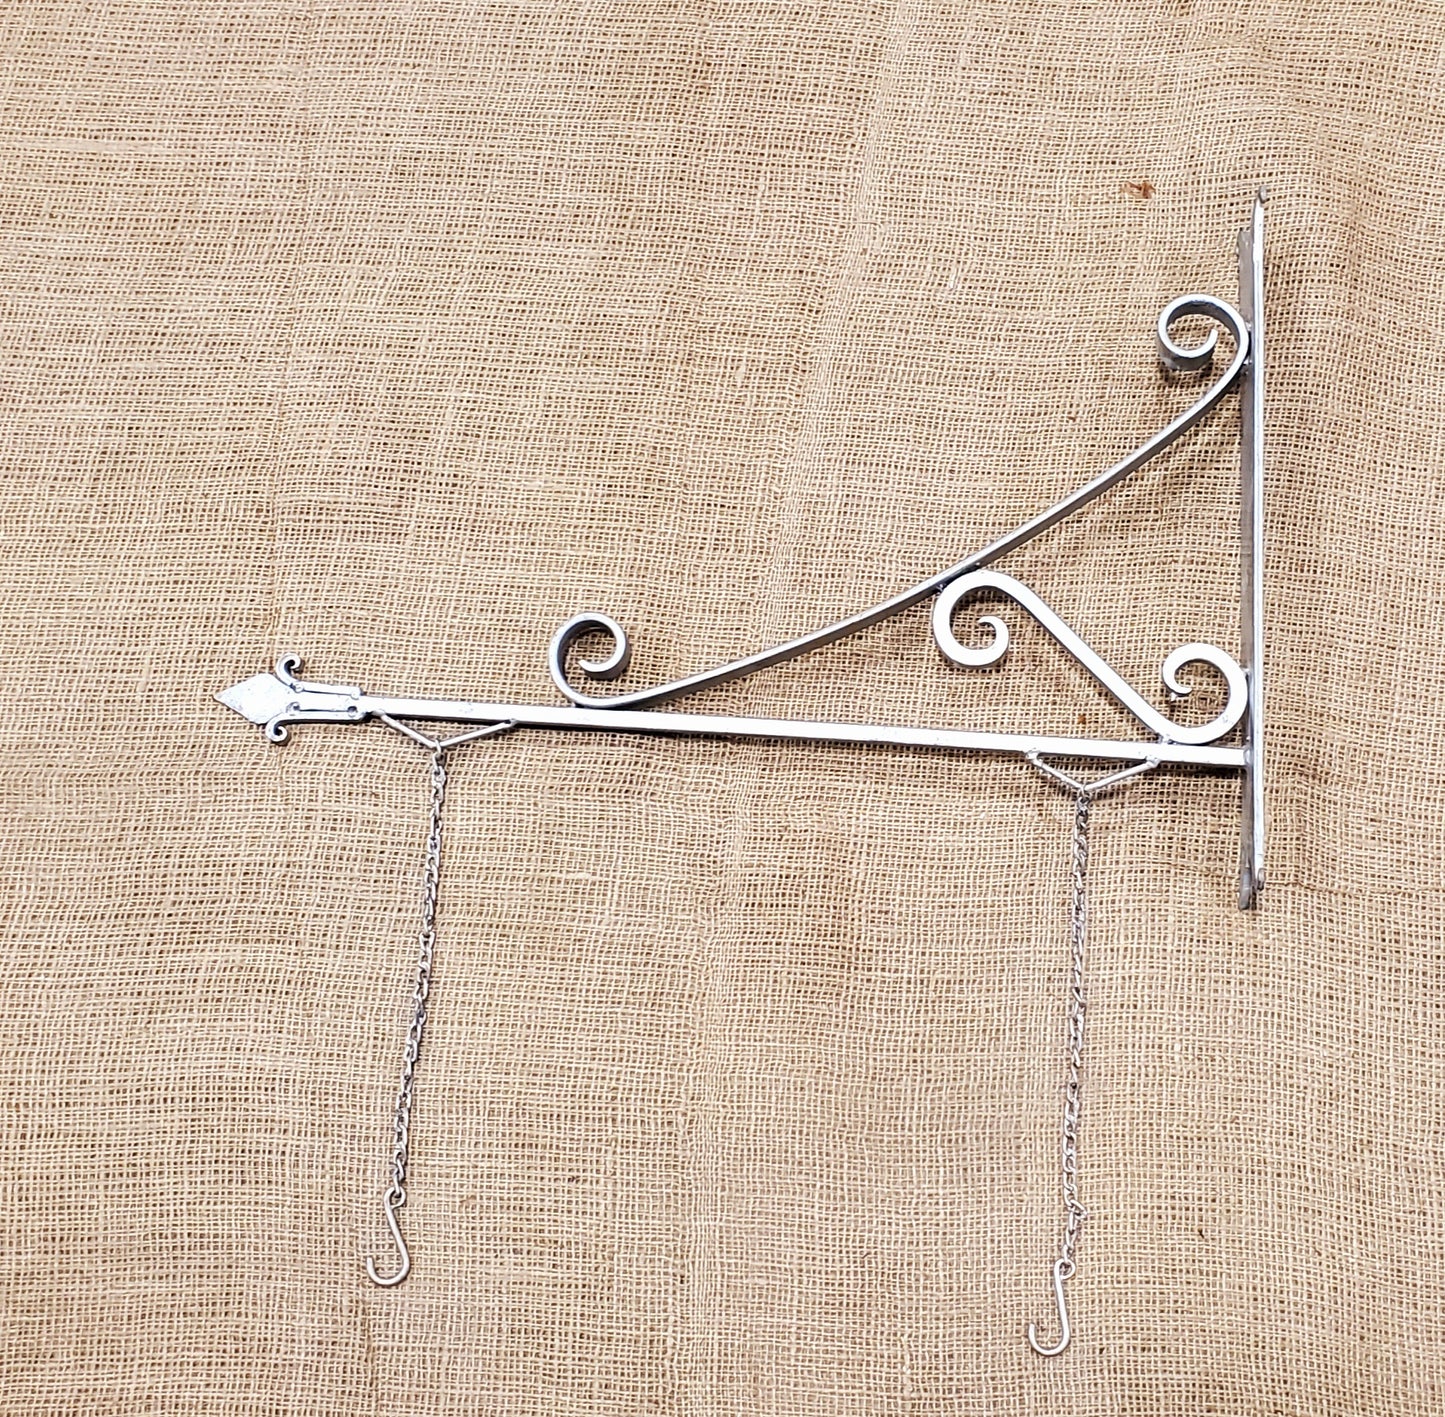 Pub Style Hanging Bracket with Chains 24" - Hand Forged